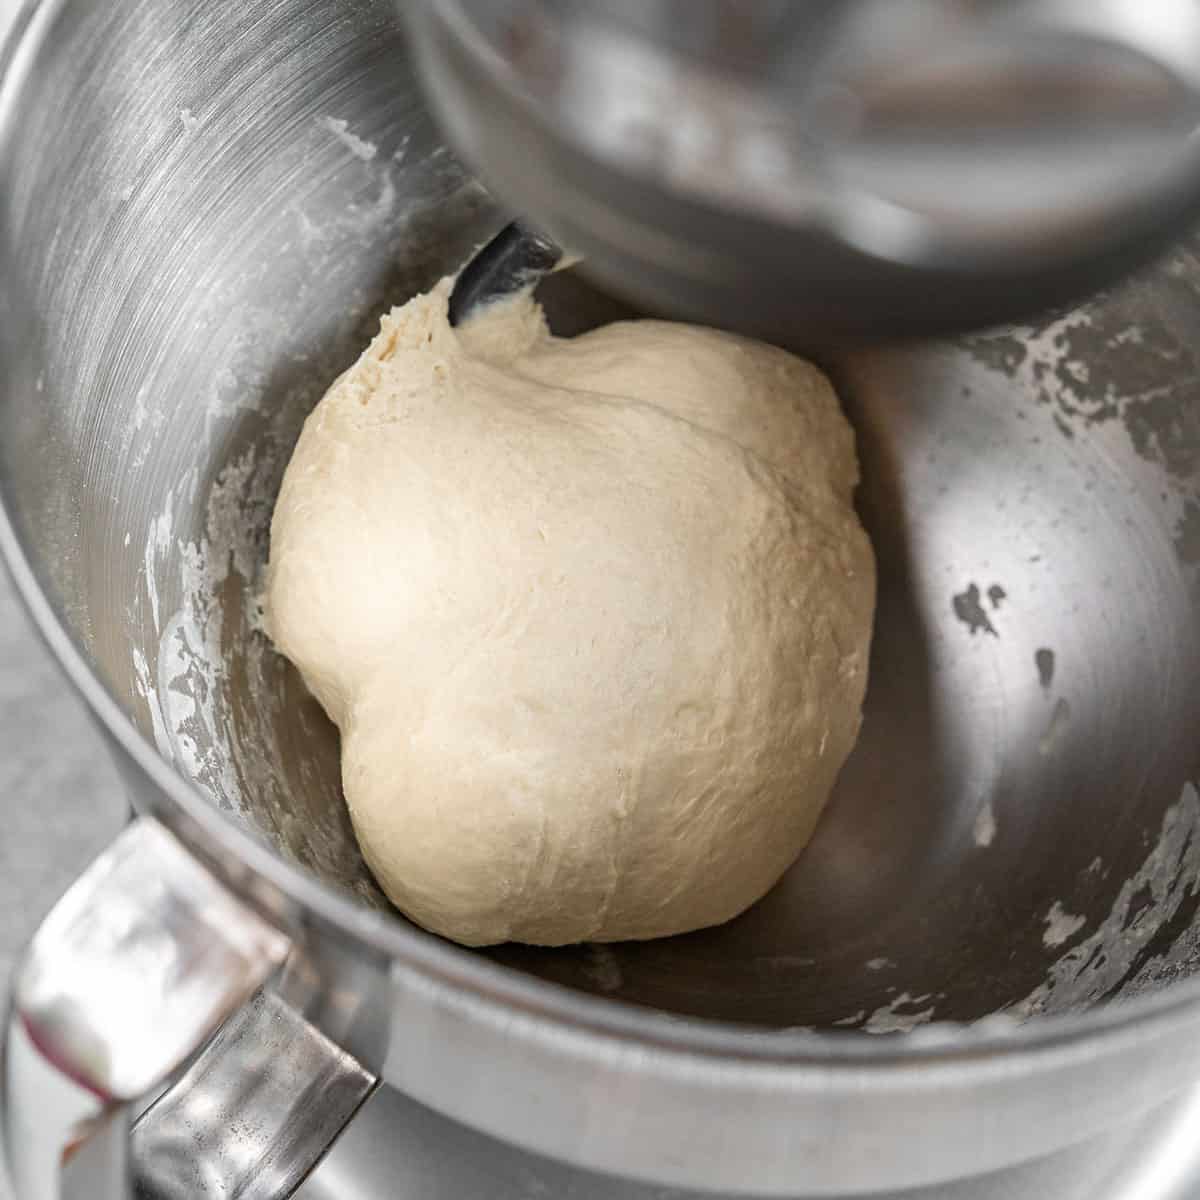 making pita bread dough in a stainless steel standing mixer